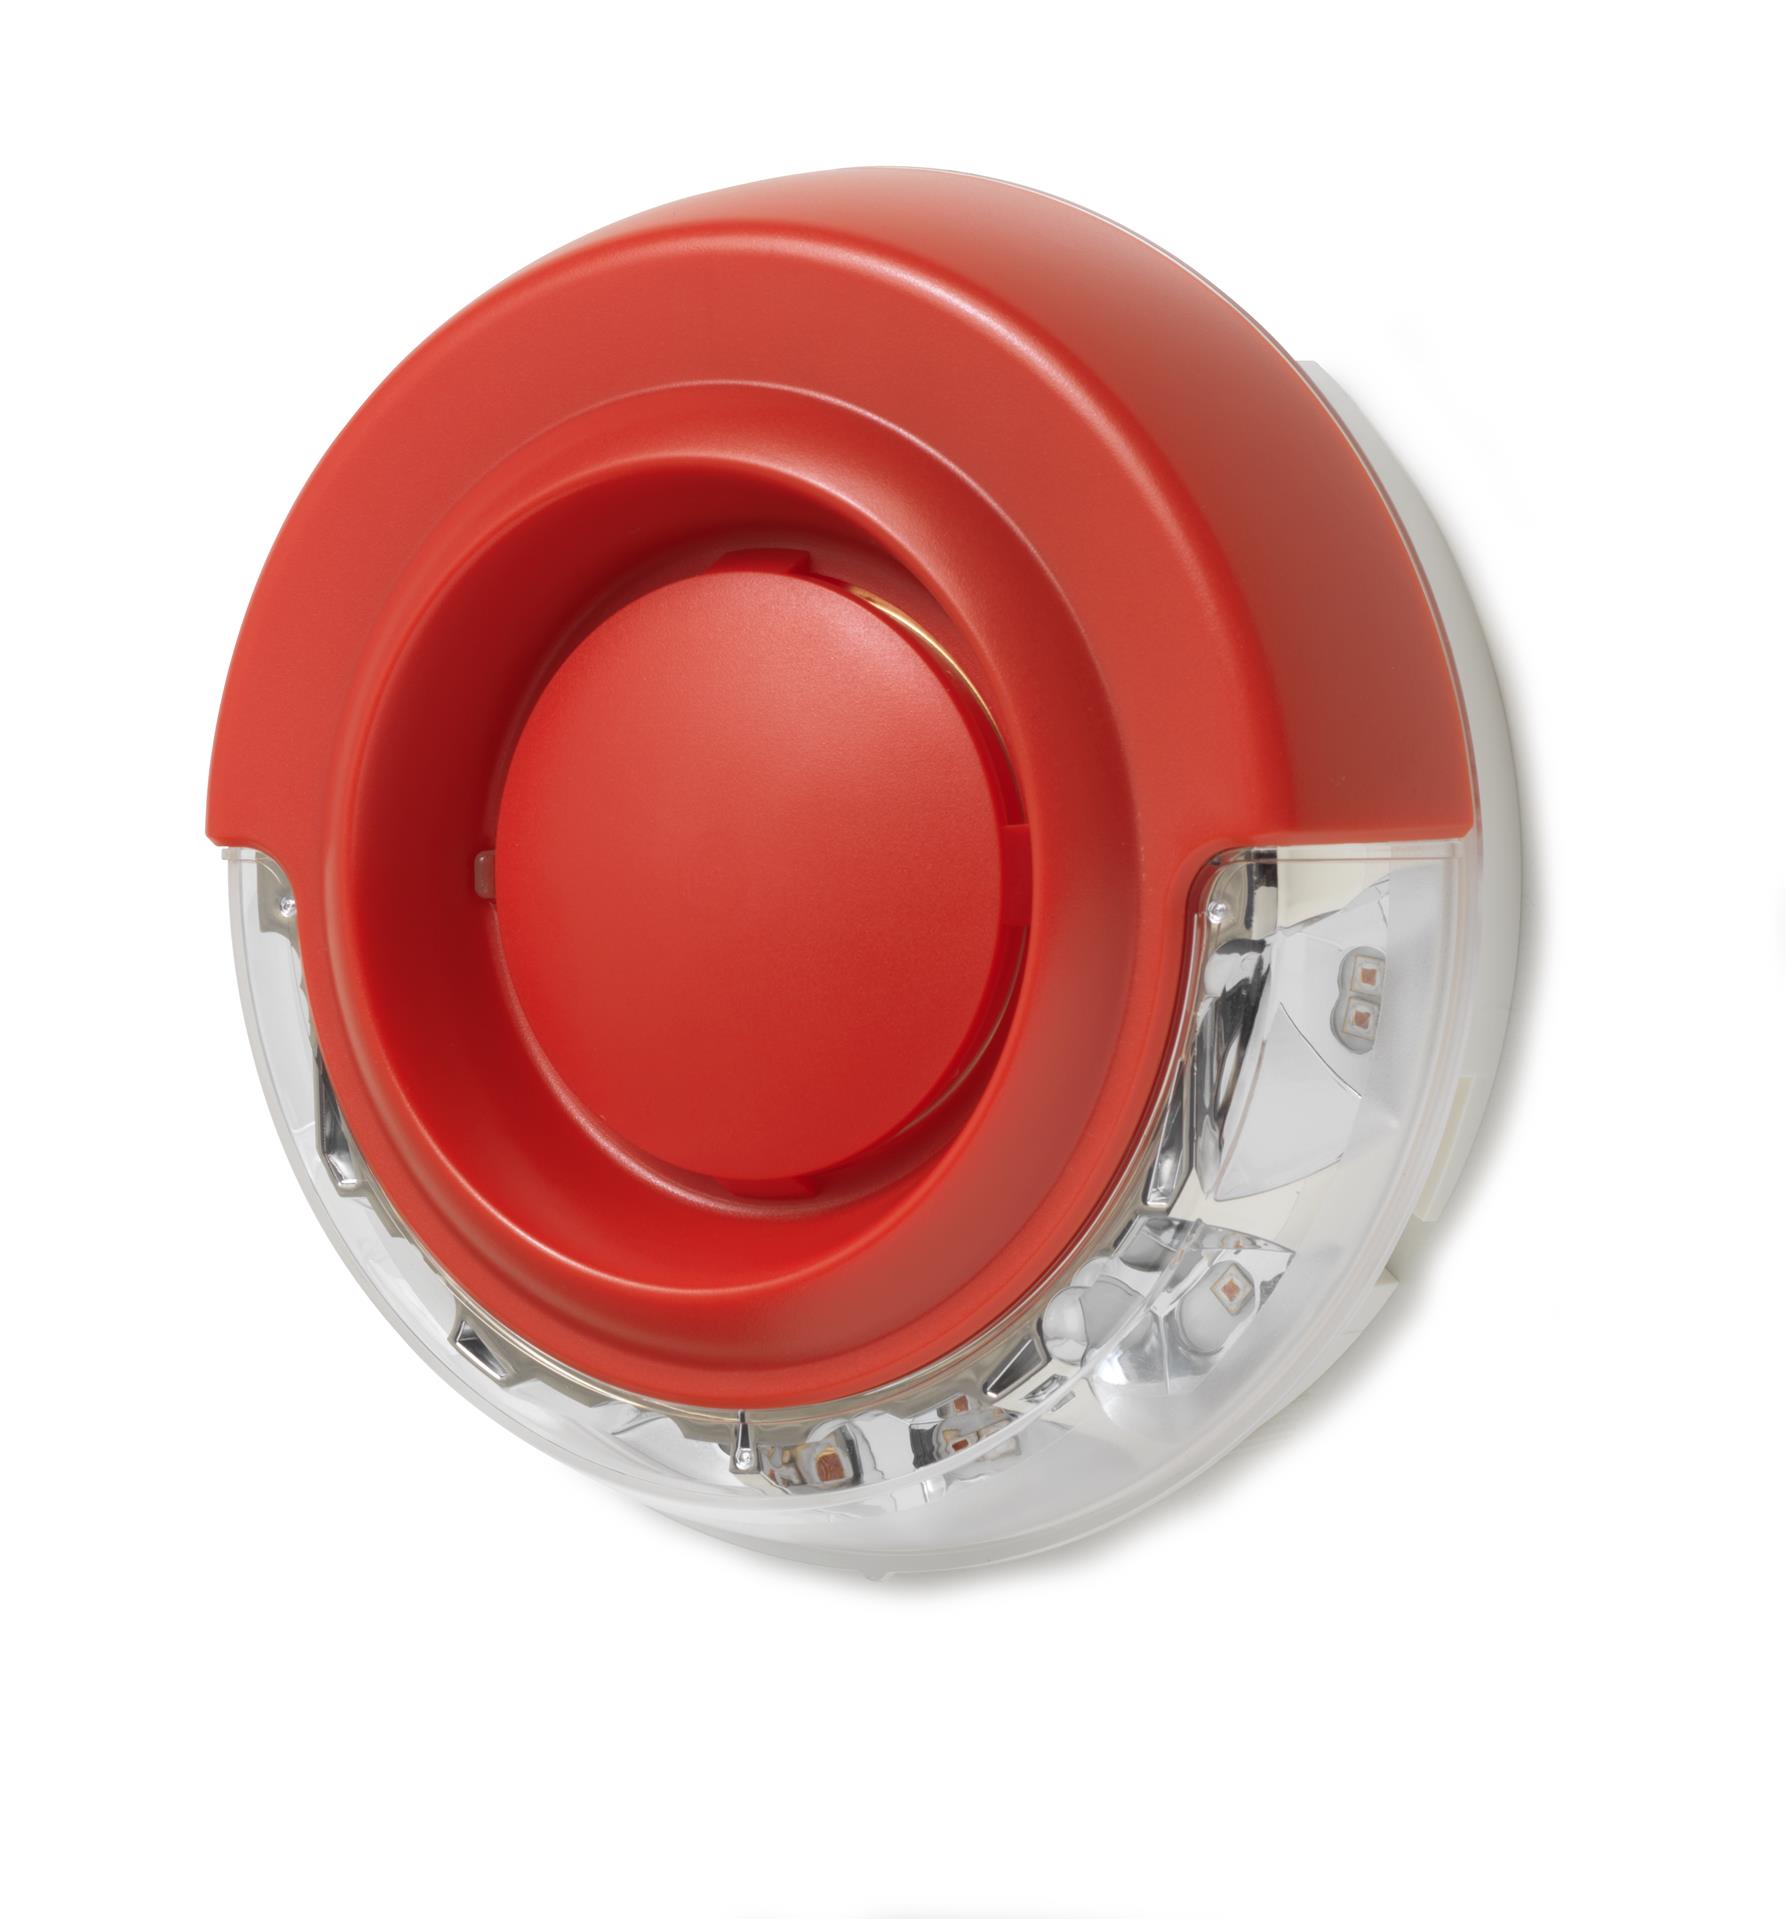 SIEMENS FDS226-RR Addressable Sounder Beacon (Red – Red)